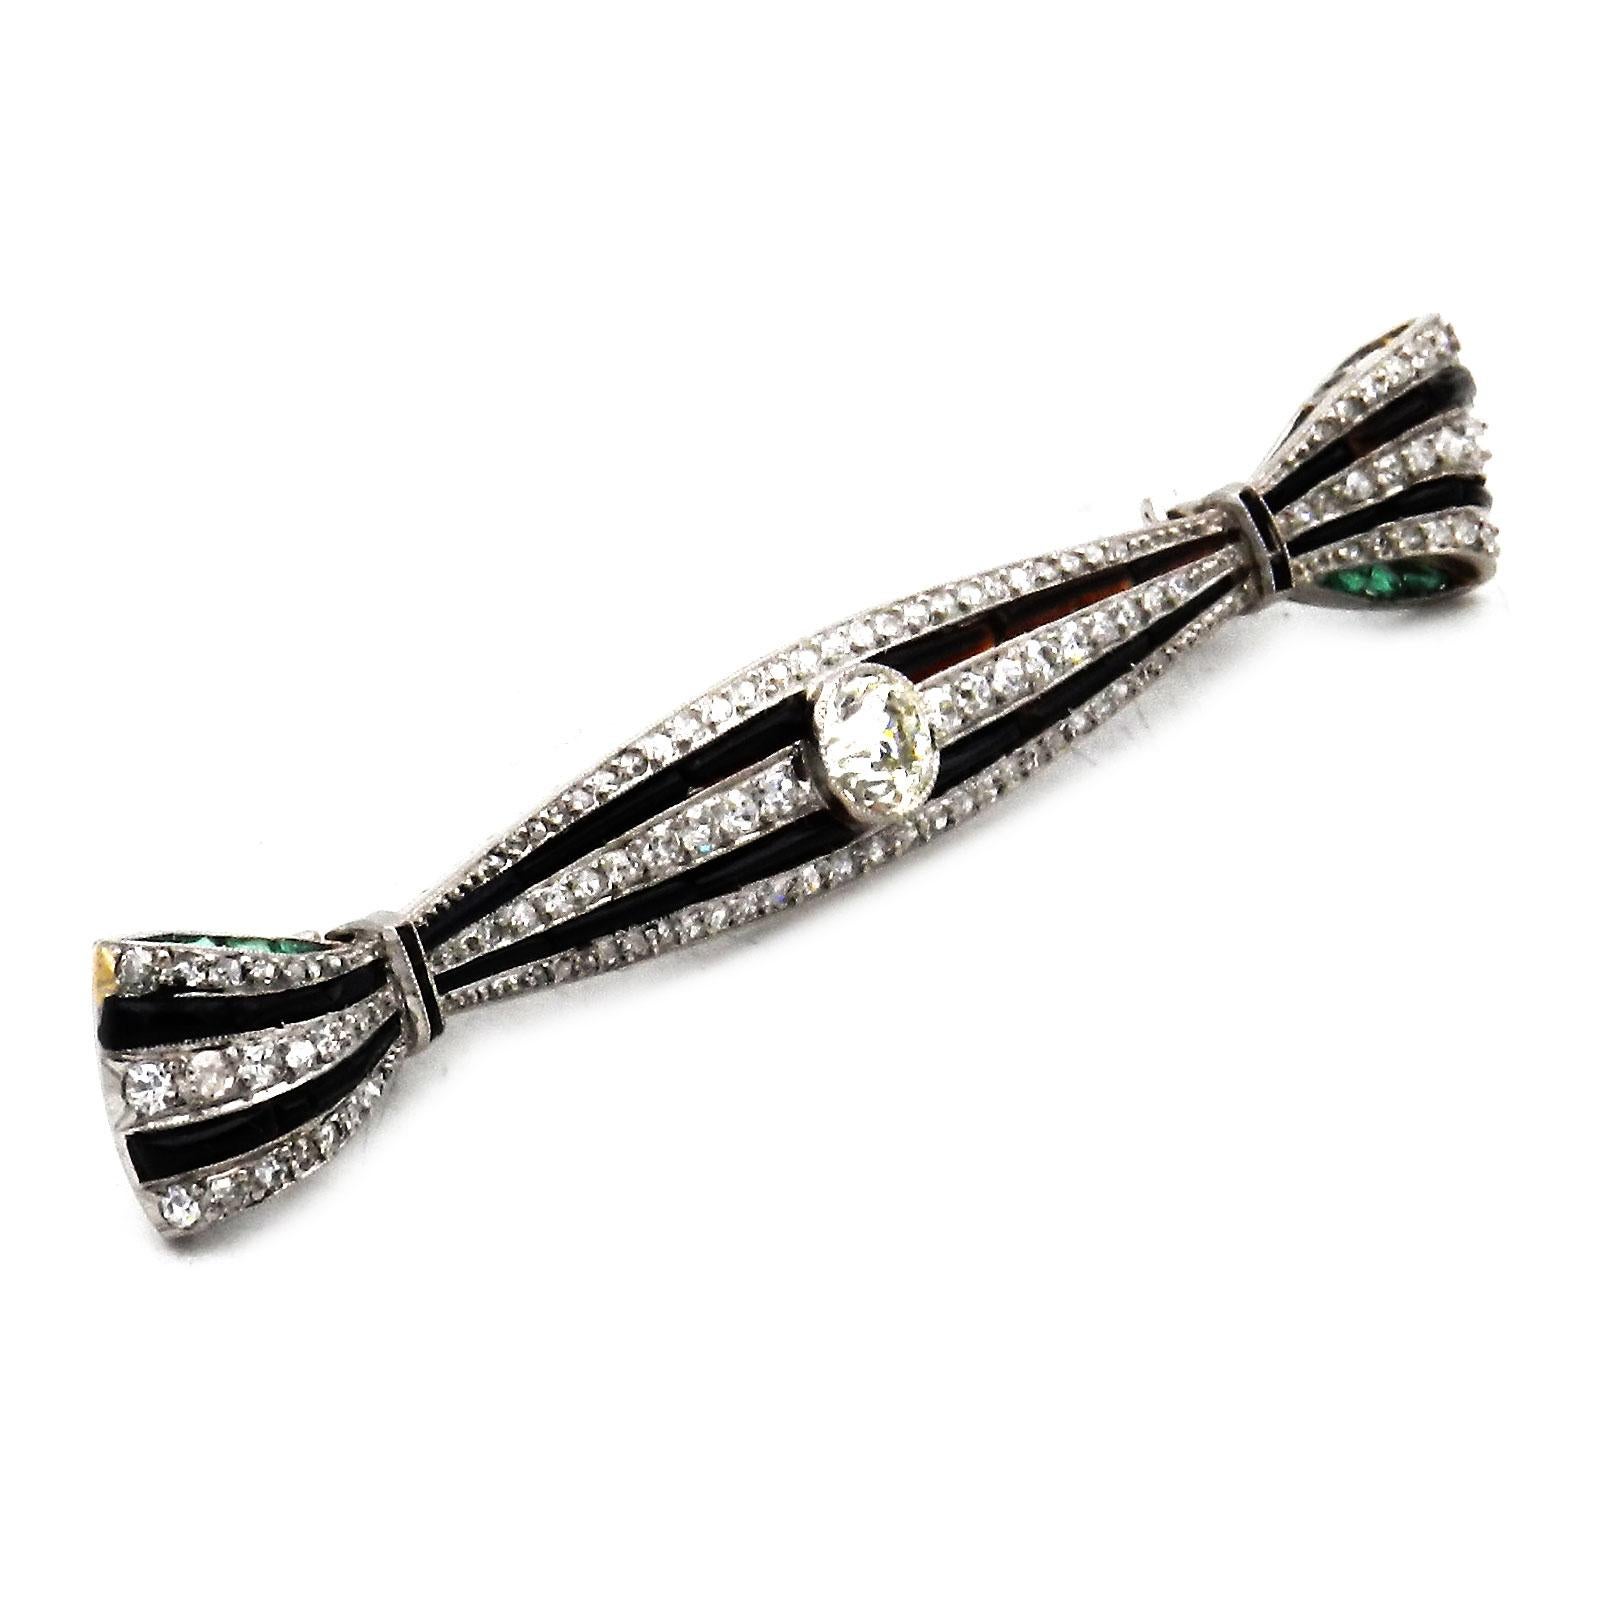 Art Deco Onyx 0.94 Carat Diamond Platinum Bow Brooch circa 1920

Decorative, very finely worked bar brooch in the form of an elongated bow, set in the center with a large old-cut diamond of 0.54 ct, J/vs, the lengths set with alternating onyx